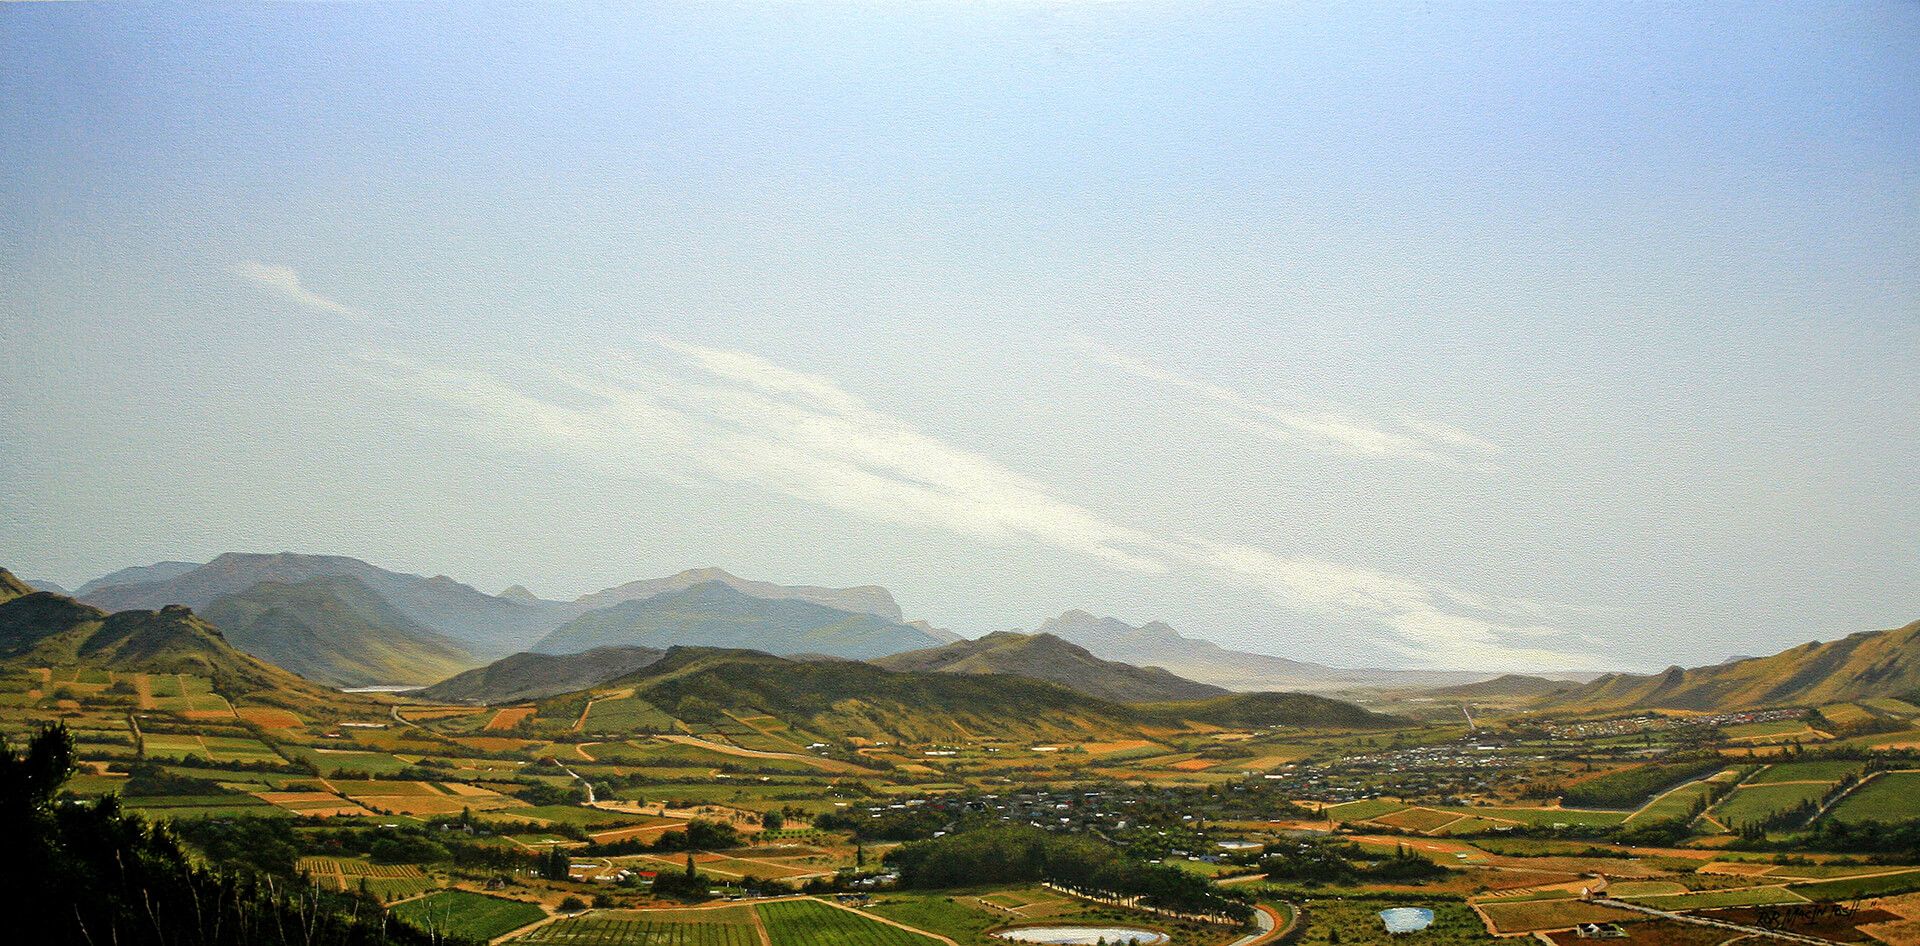 Photorealistic painting of rural landscape set in green hills